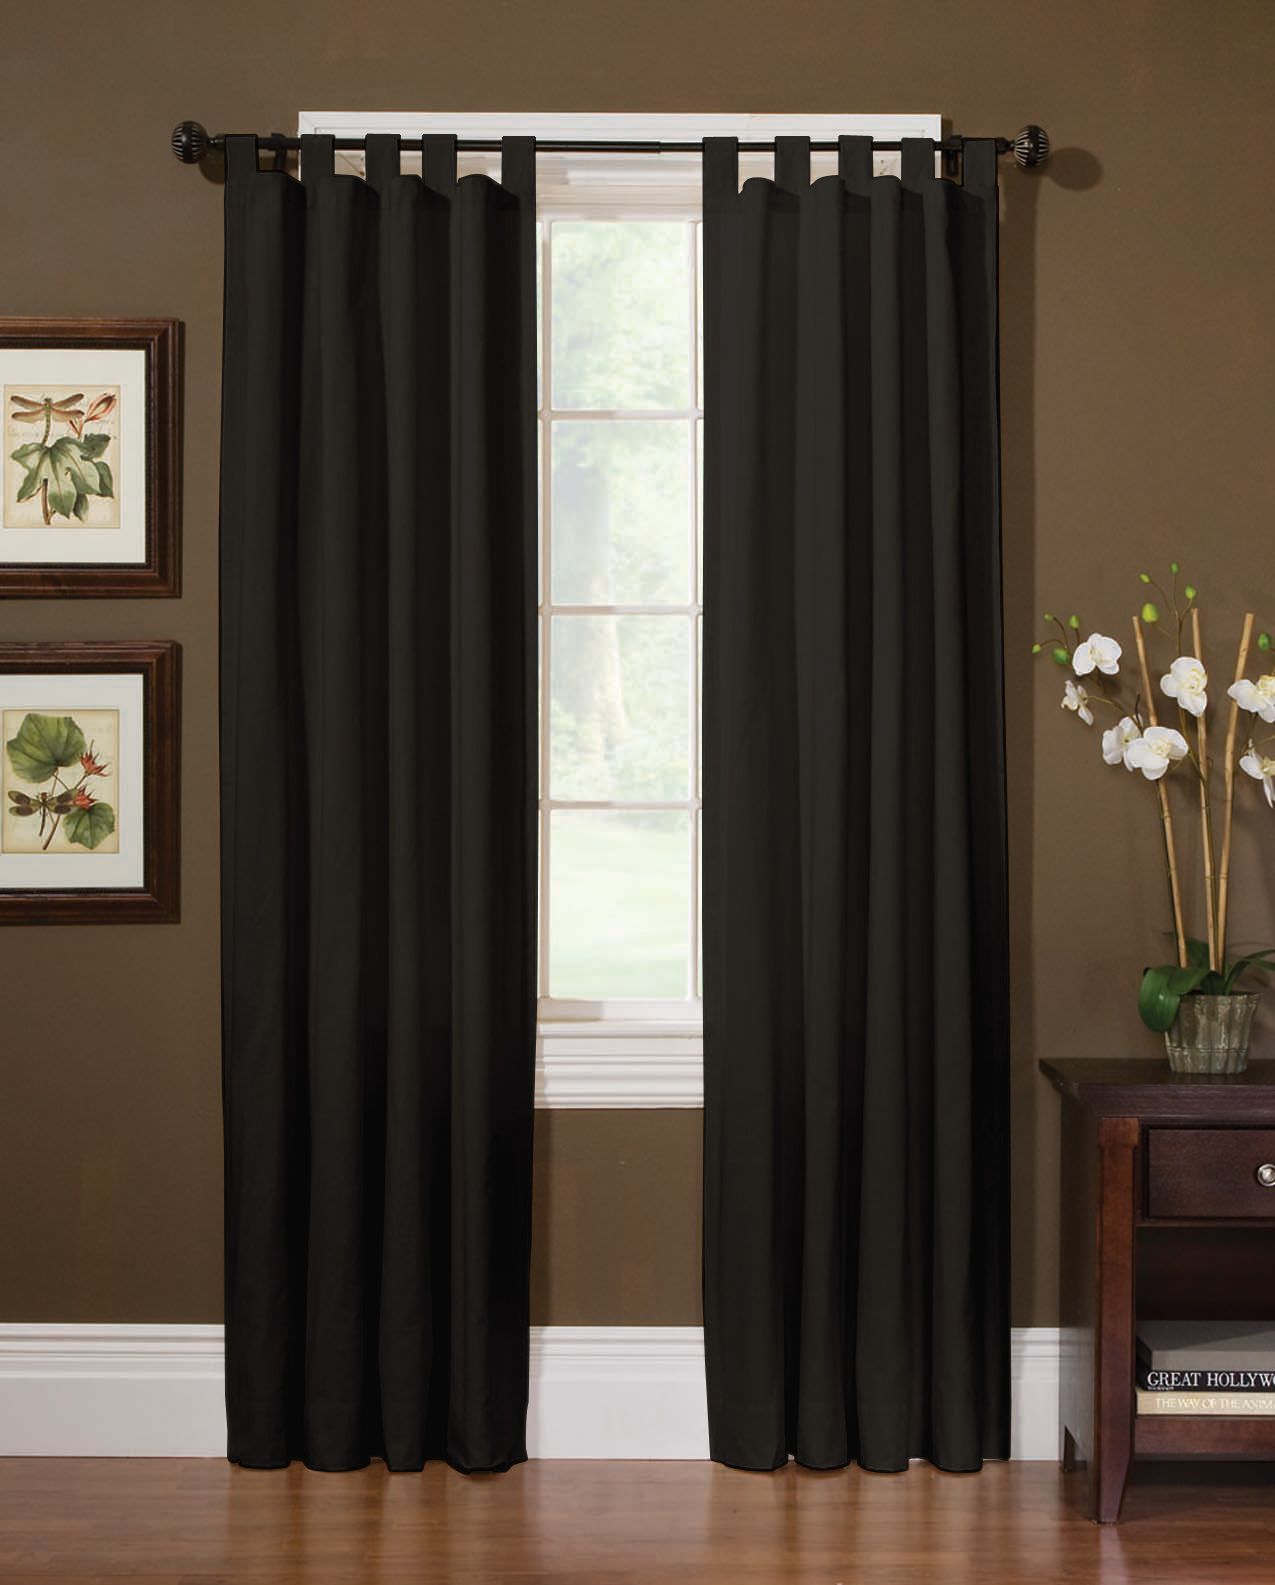 Country Living Black Sailcloth Window Panels